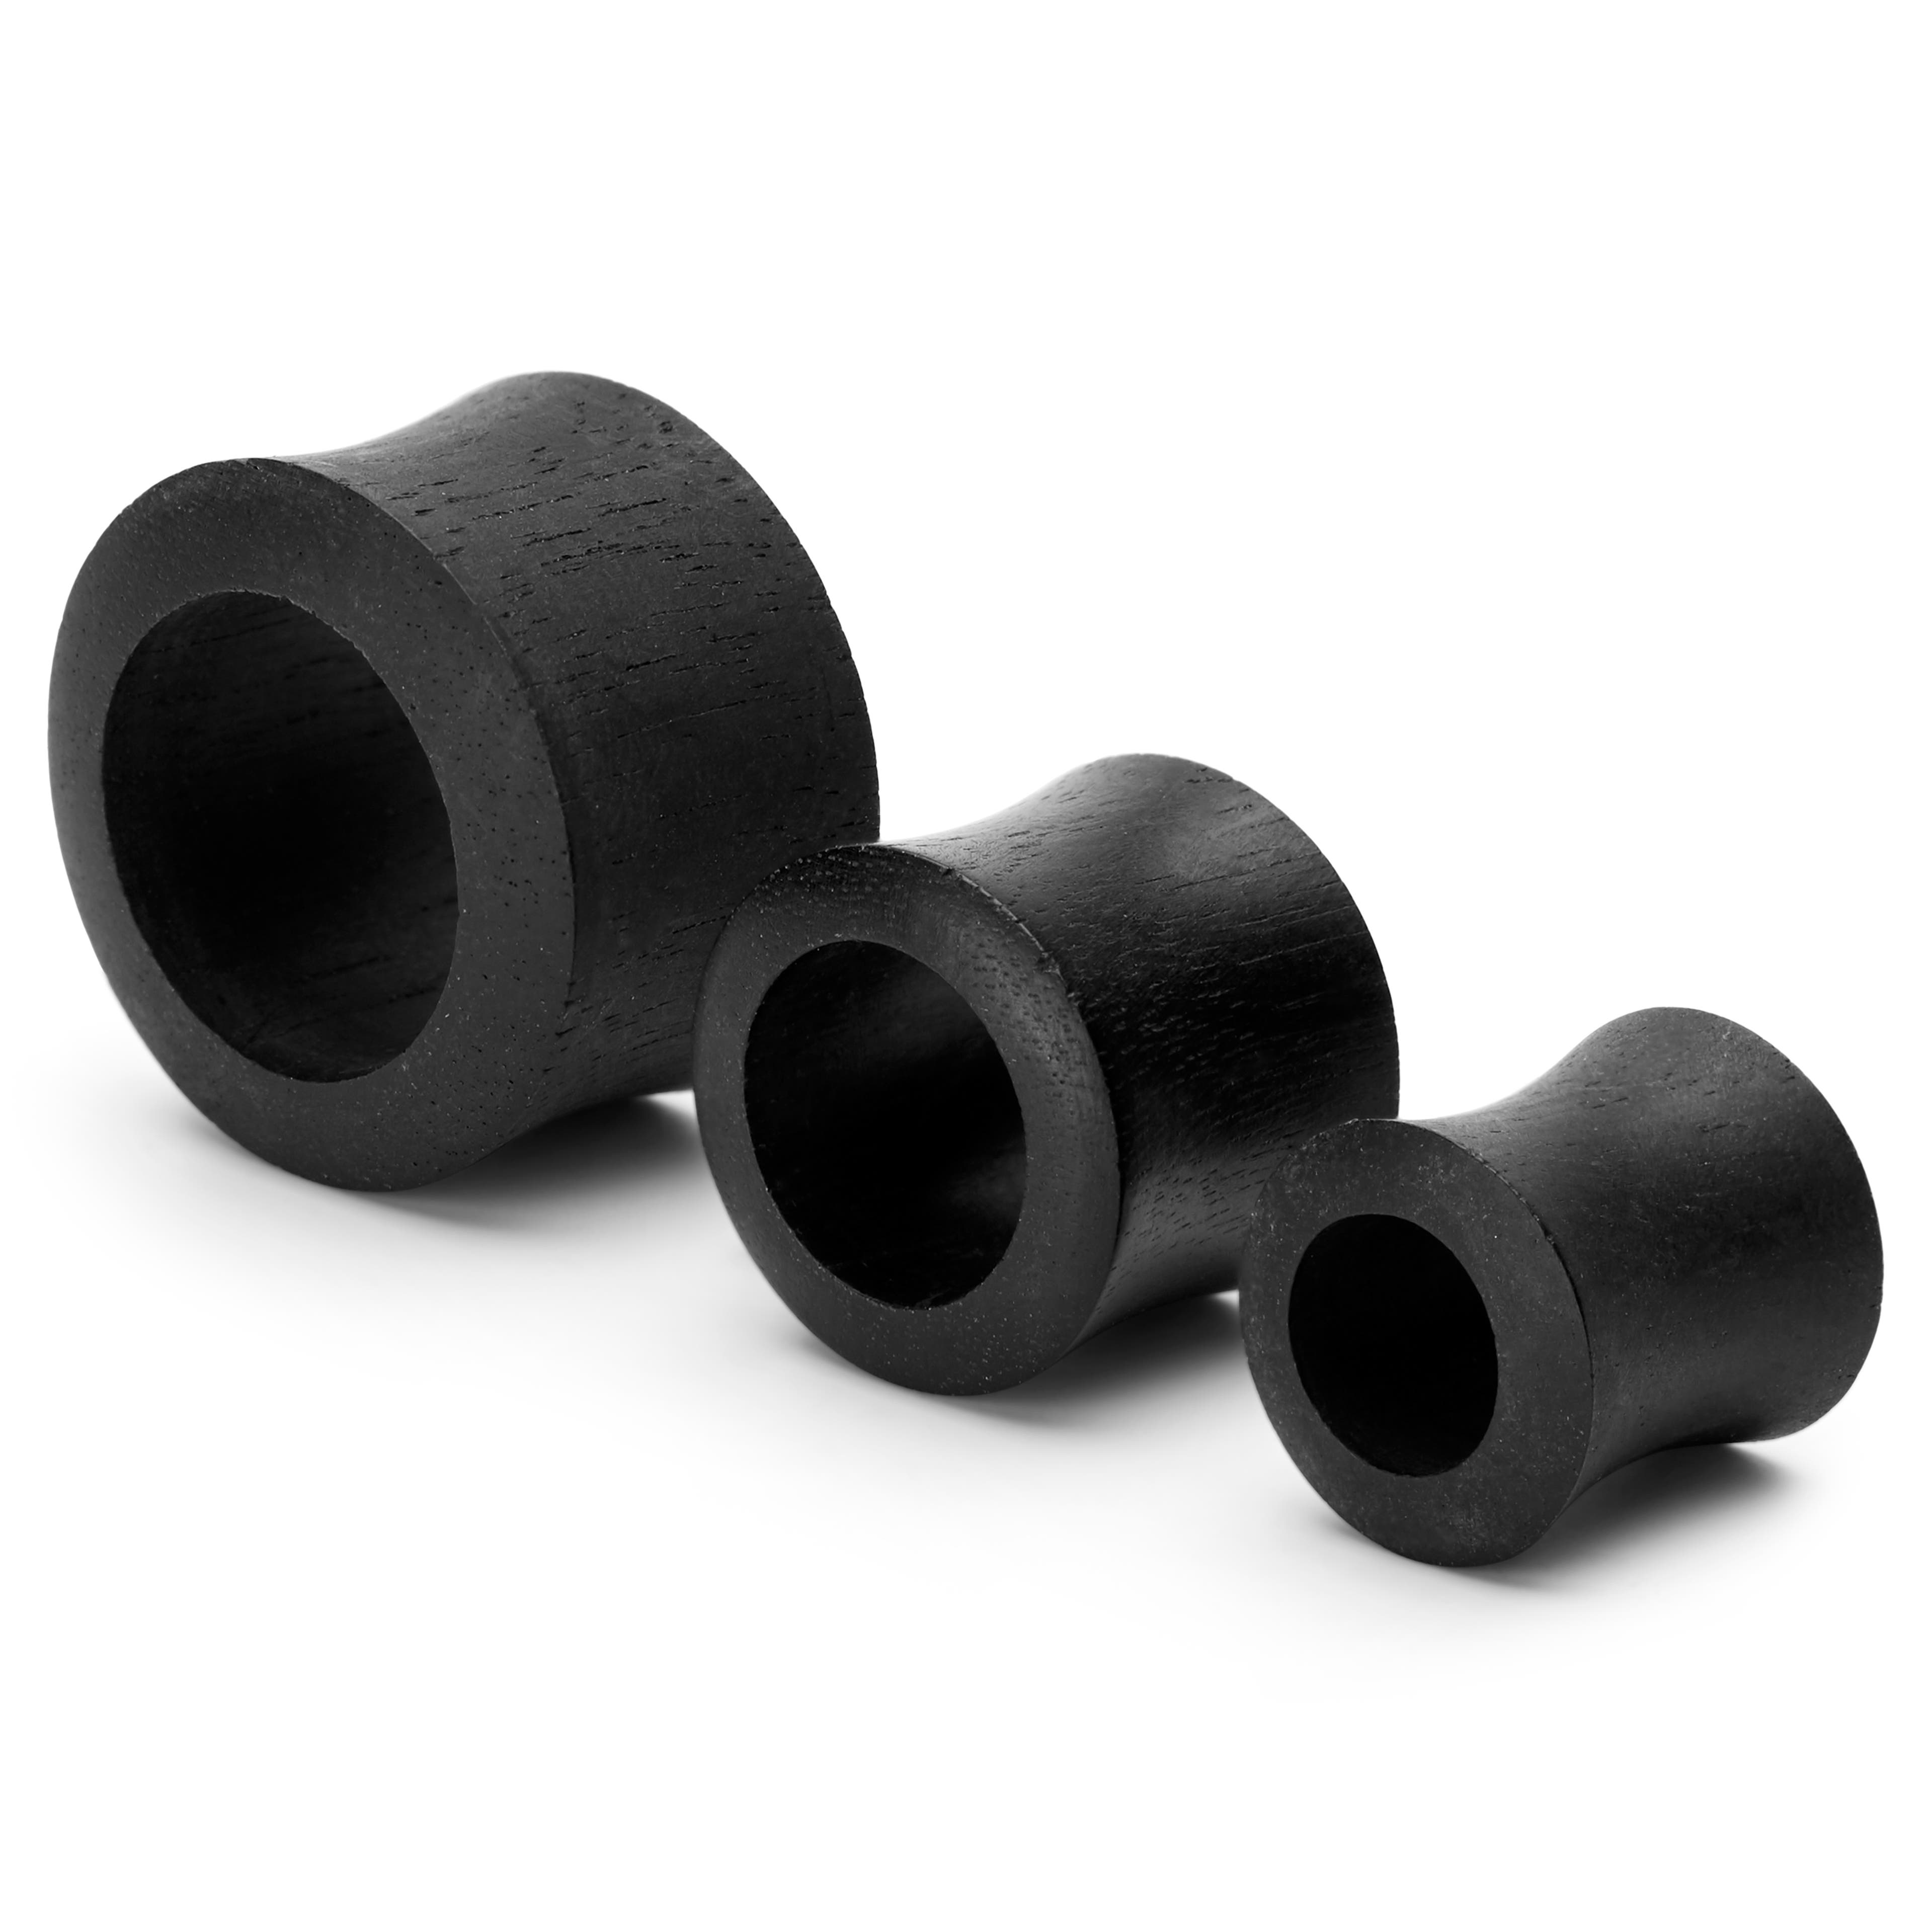 Black Areng Wood Double Flared Tunnel Earring